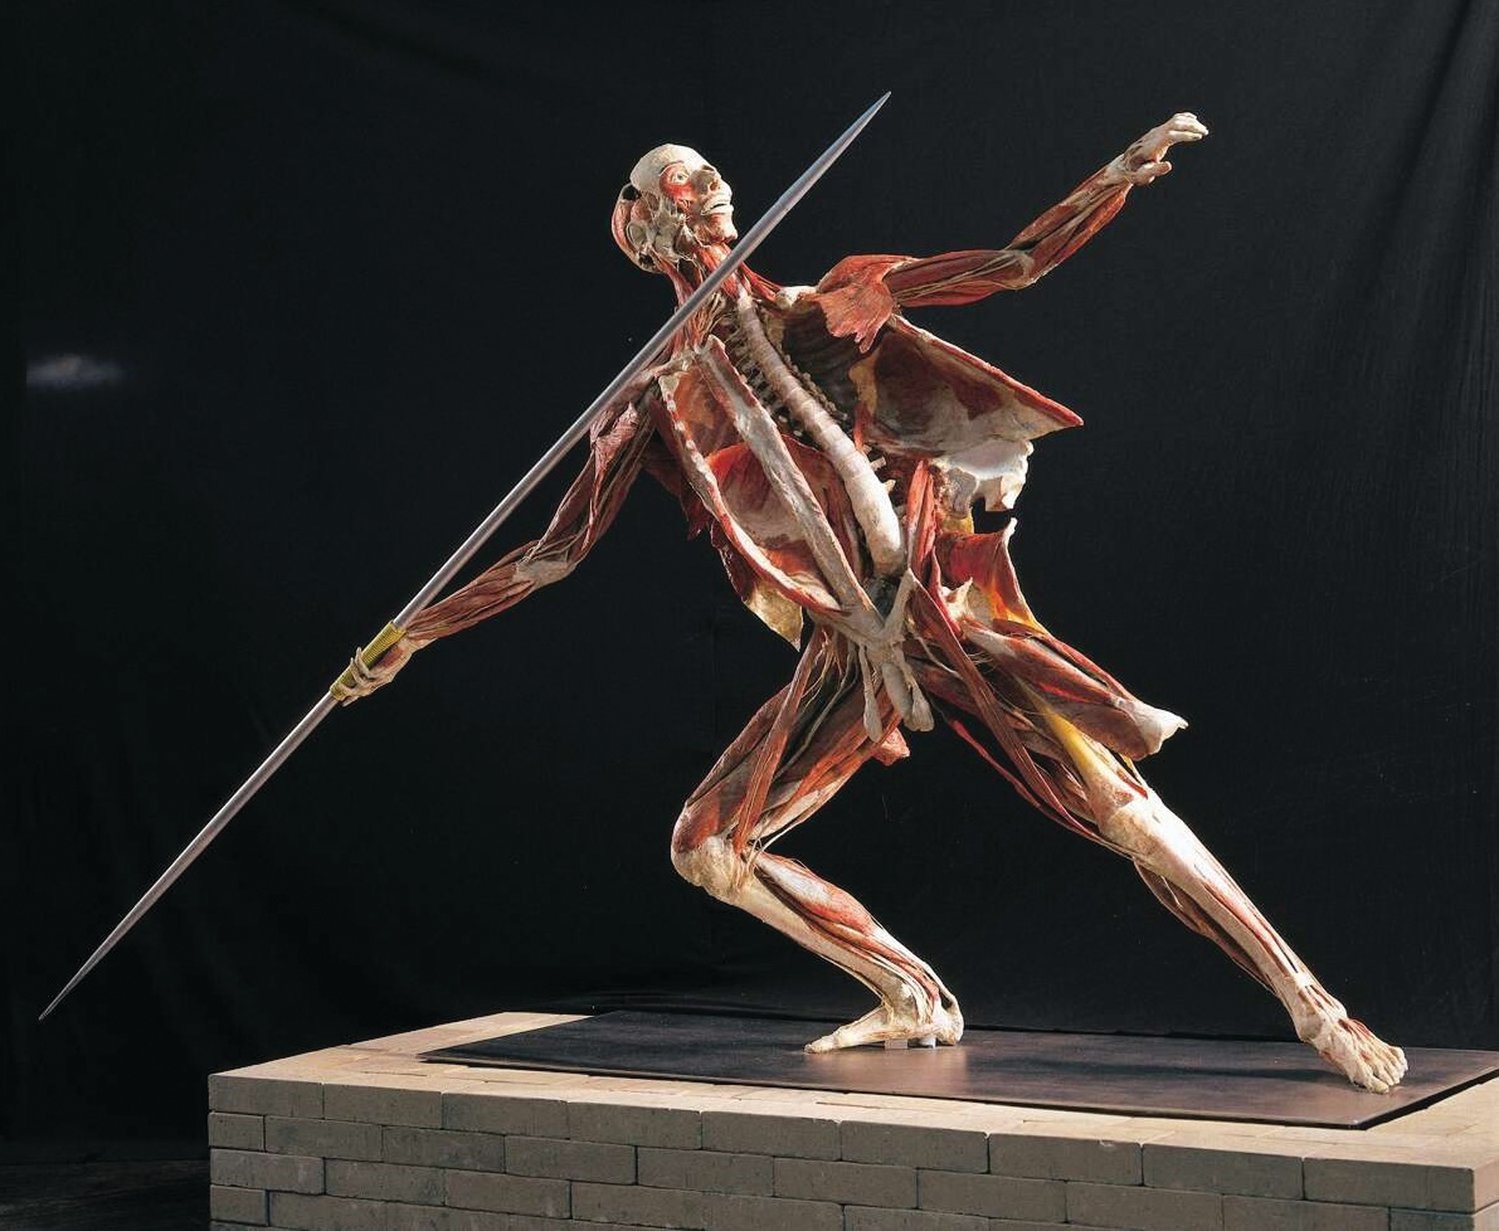 This once-human specimen is posed as a javelin thrower to allow visitors to see his muscles at Body World Rx in Allentown. Contributed photo.